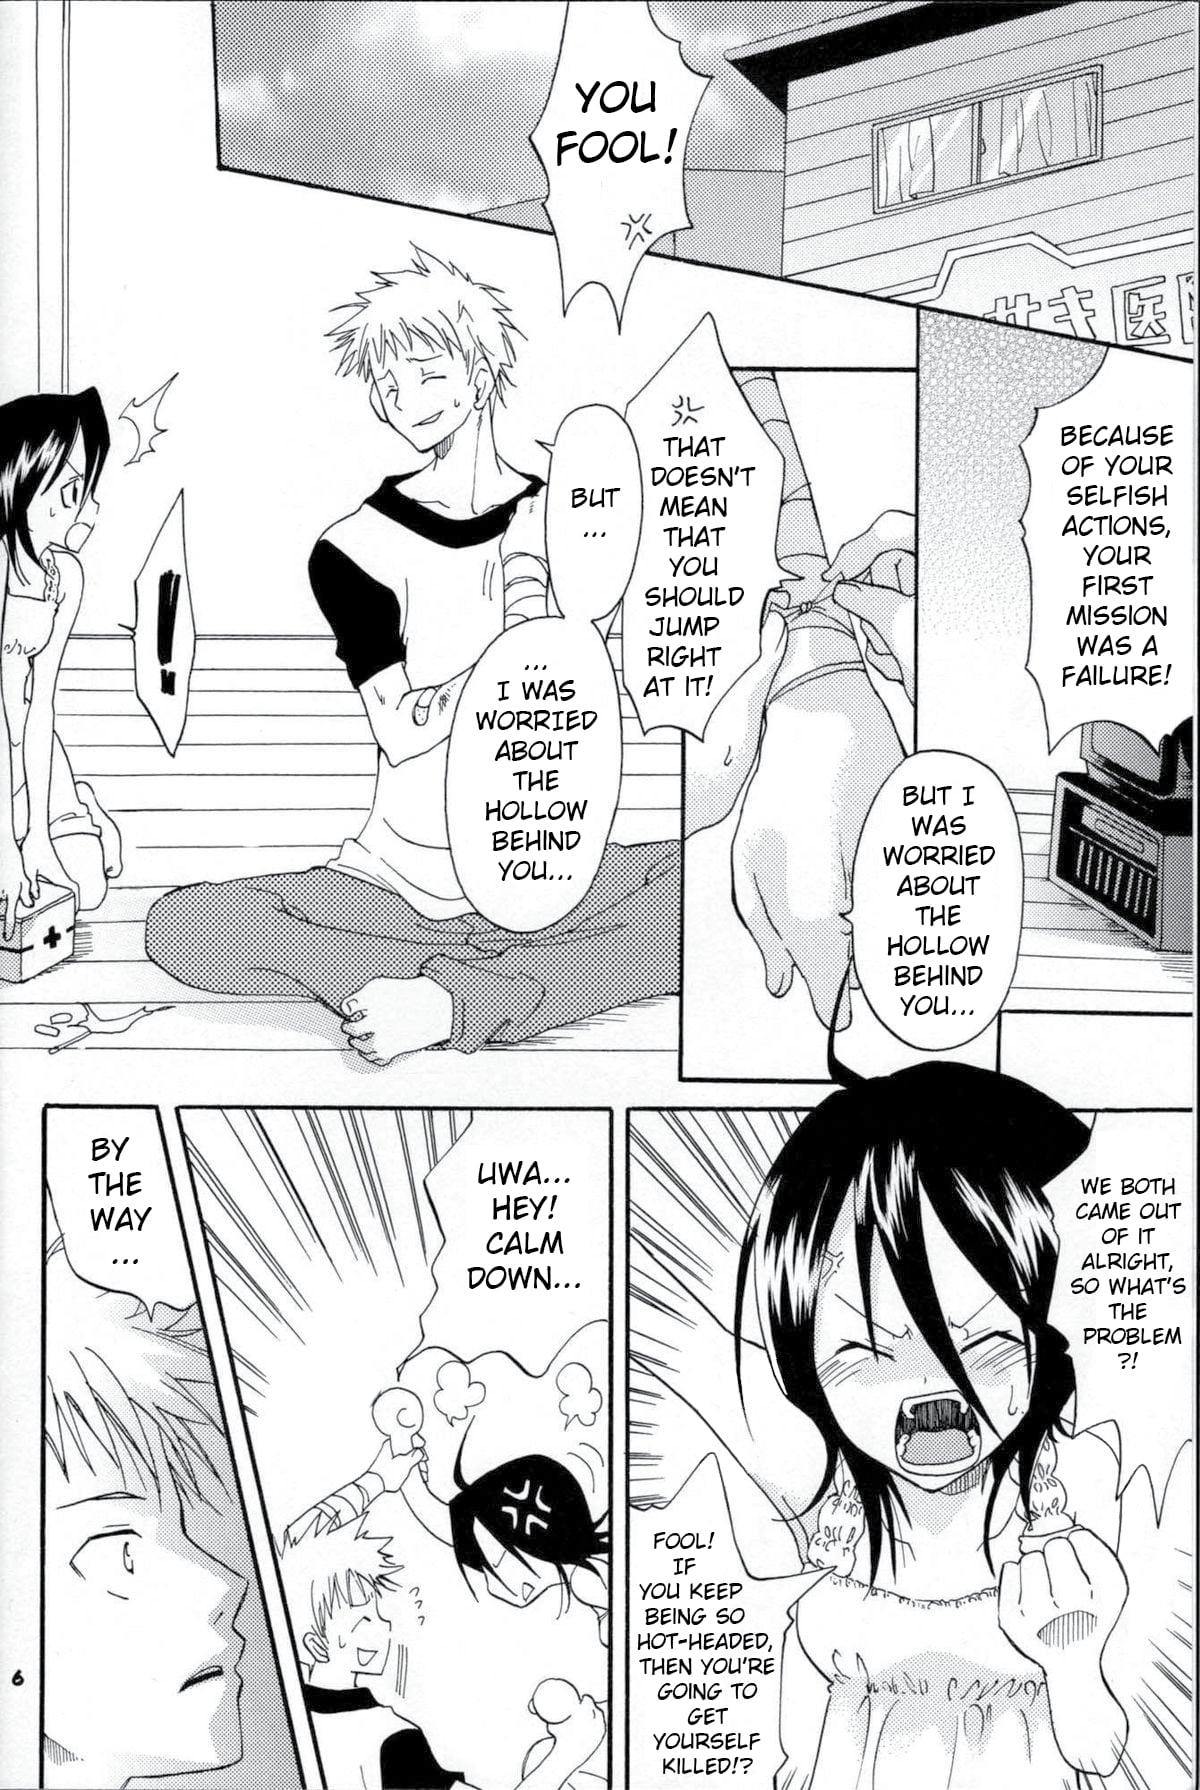 Softcore Baby Maybe - Bleach Free Teenage Porn - Page 5